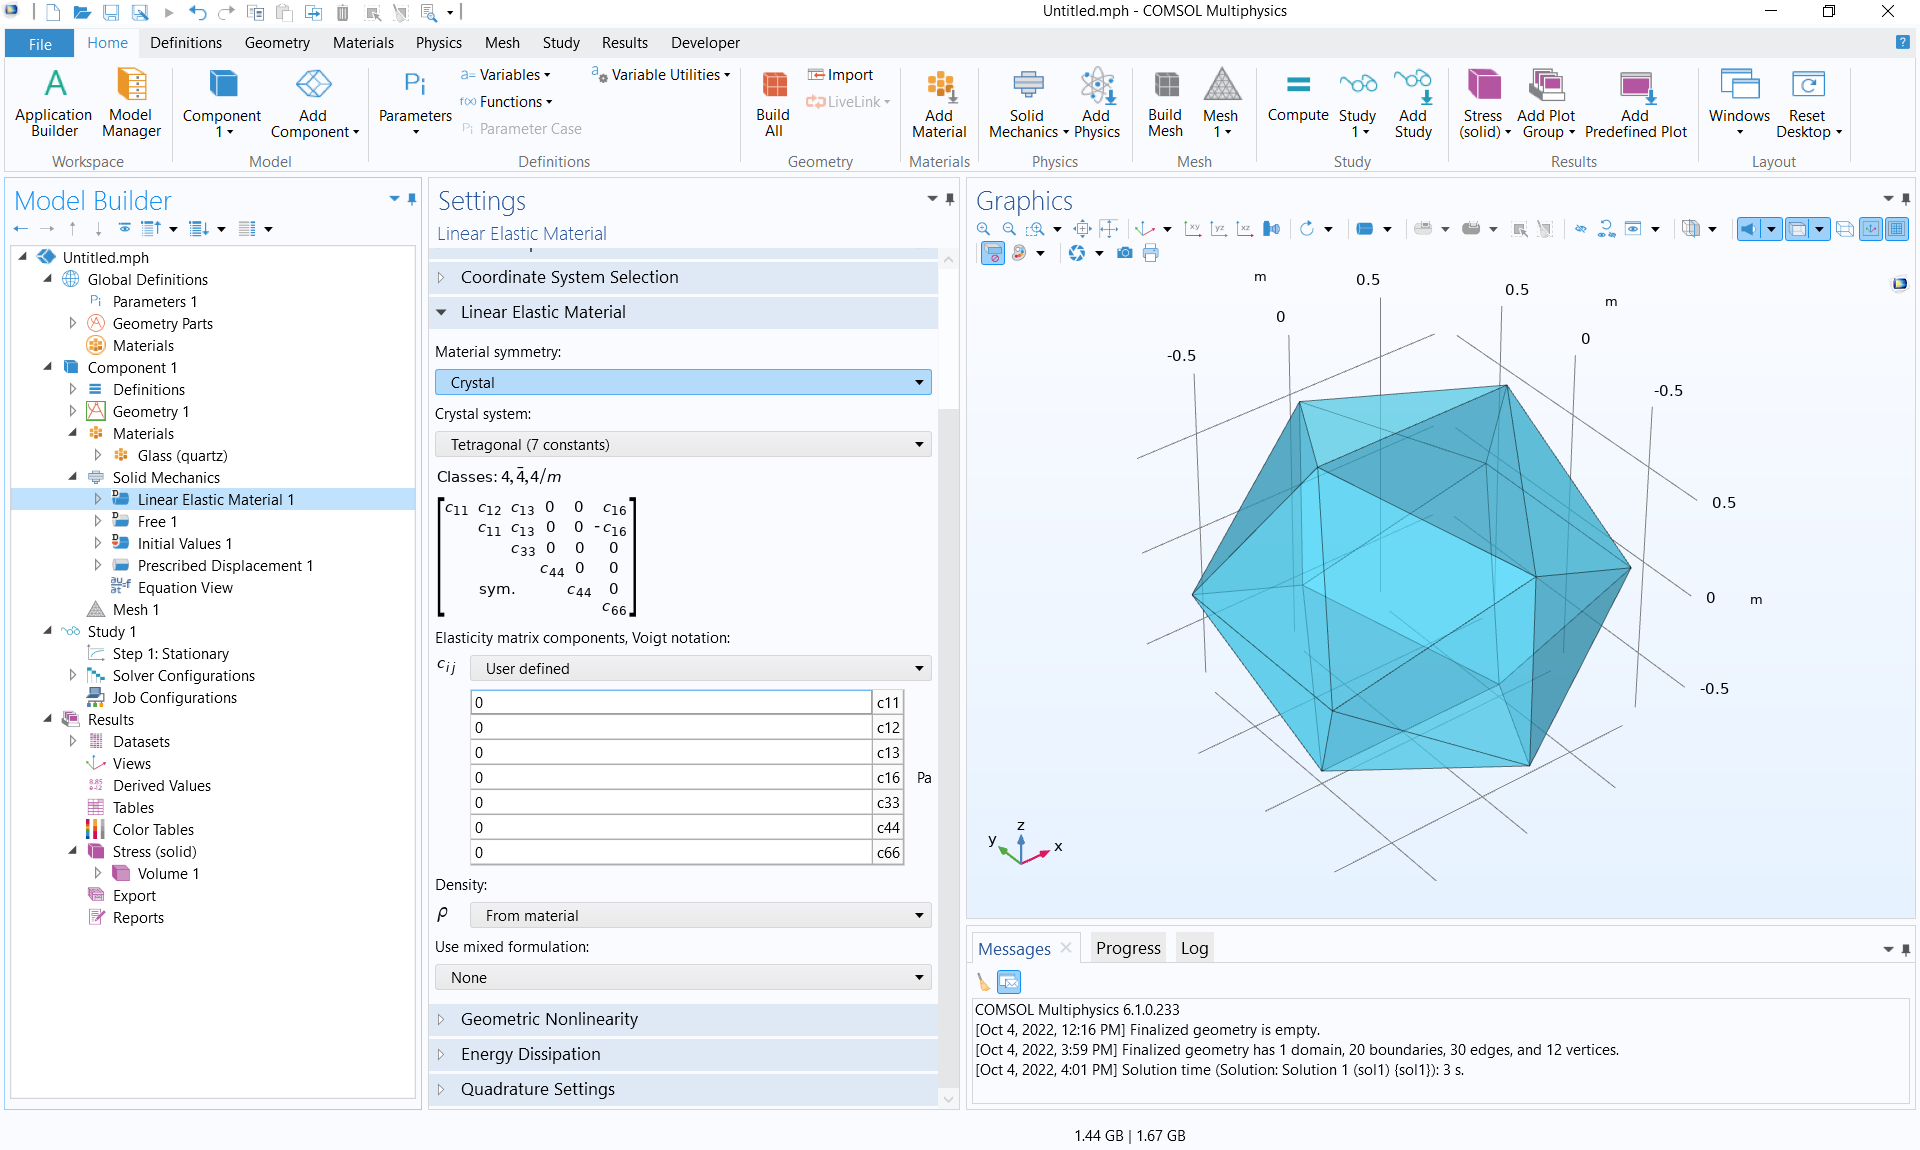 The COMSOL Multiphysics UI showing the Model Builder with the Linear Elastic Material node highlighted, the corresponding Settings window, and a 3D object in the Graphics window.